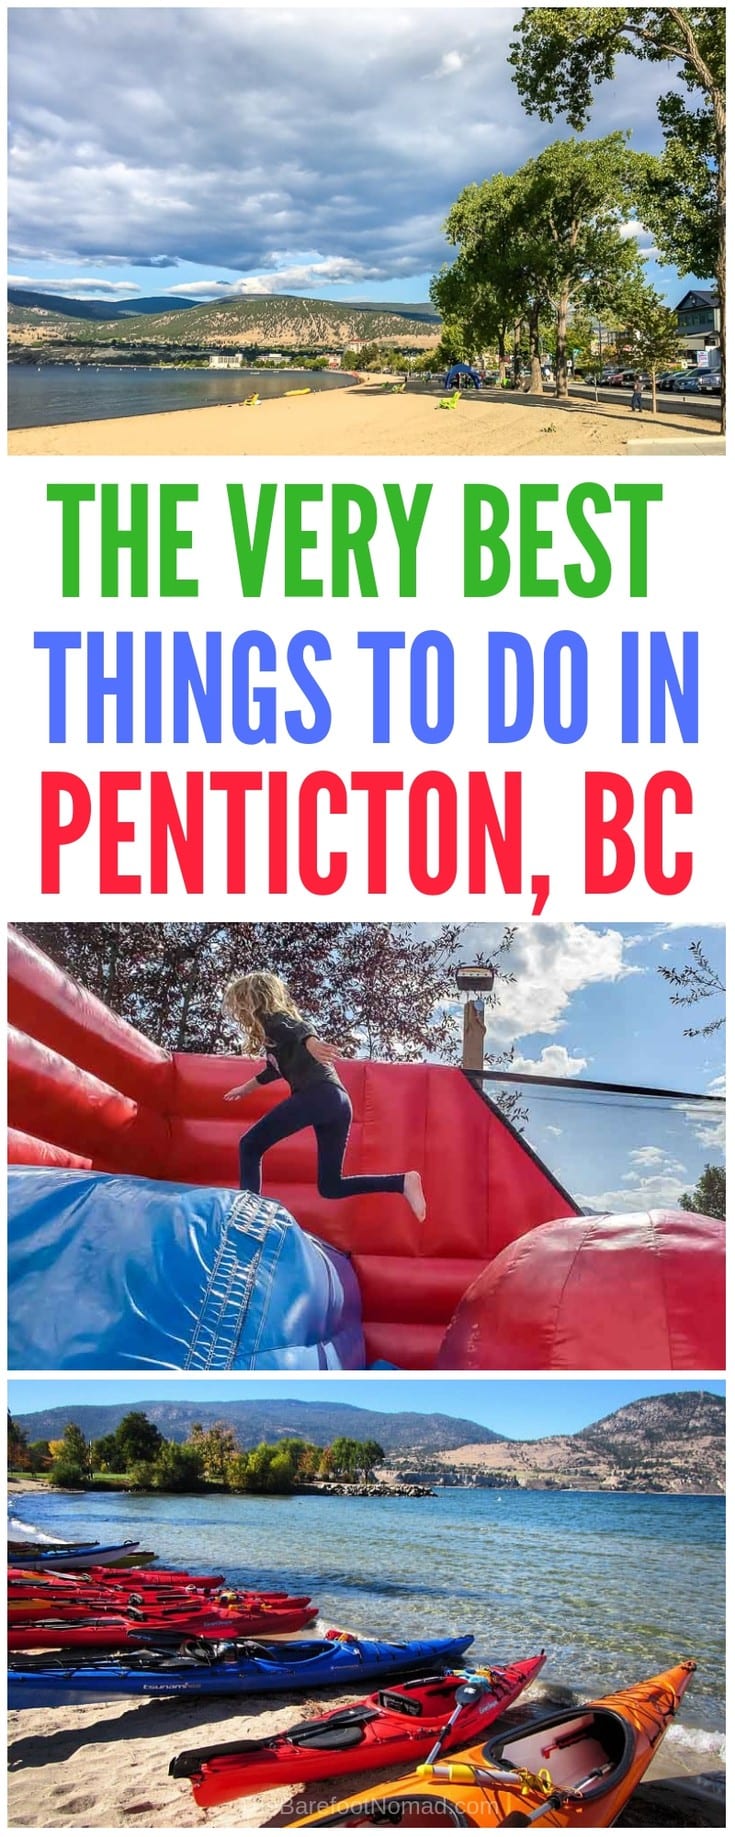 The best things to do in Penticton British Columbia. We share our favorite things to do when you travel to this lovely small city in BC Canada, with the best beaches, lakes, food, activities, and more.